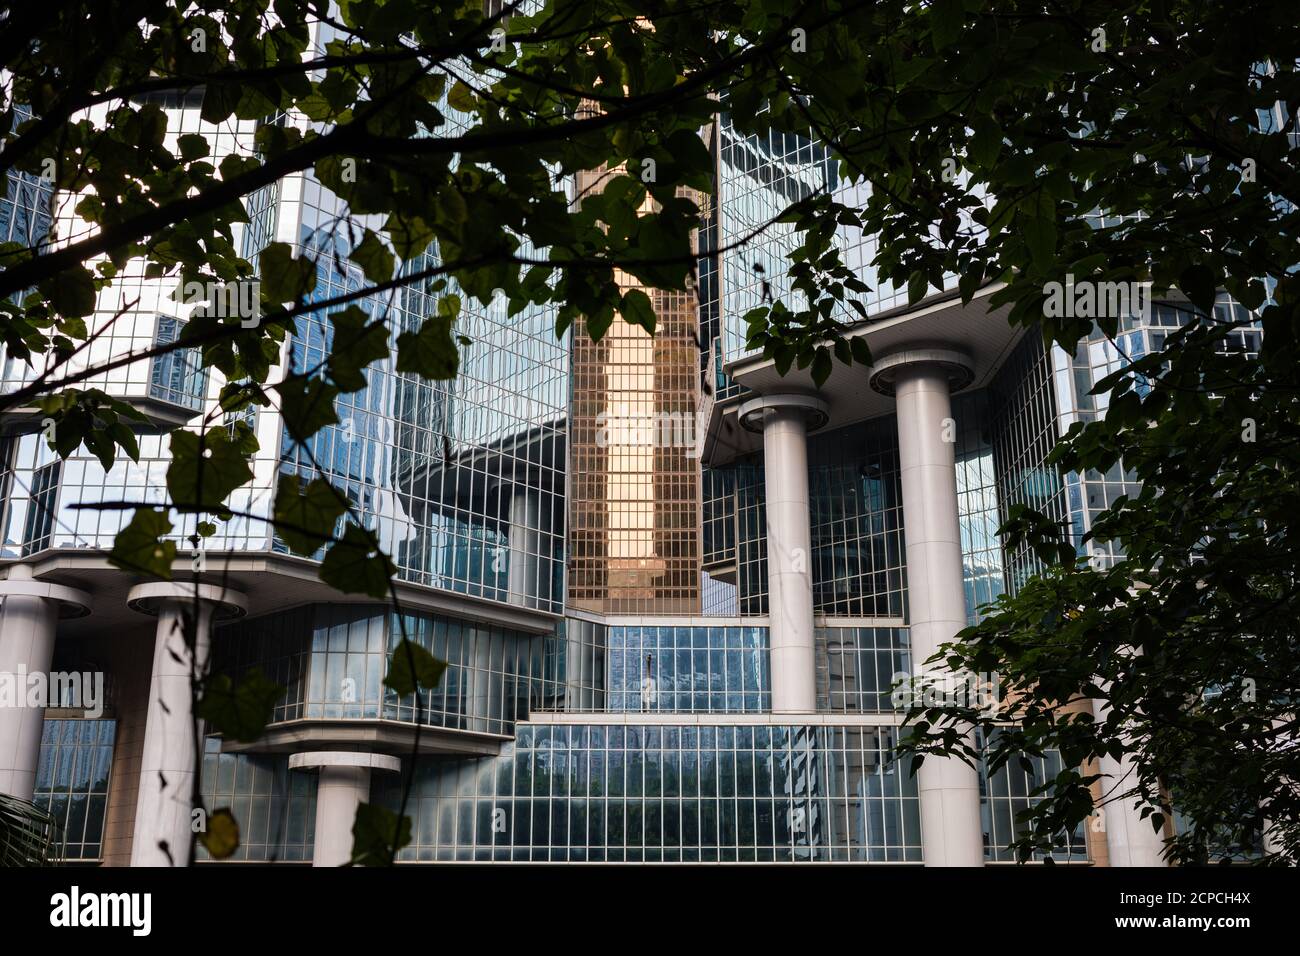 Glass facades with reflections, architecture in Admiralty, Hong Kong Stock Photo